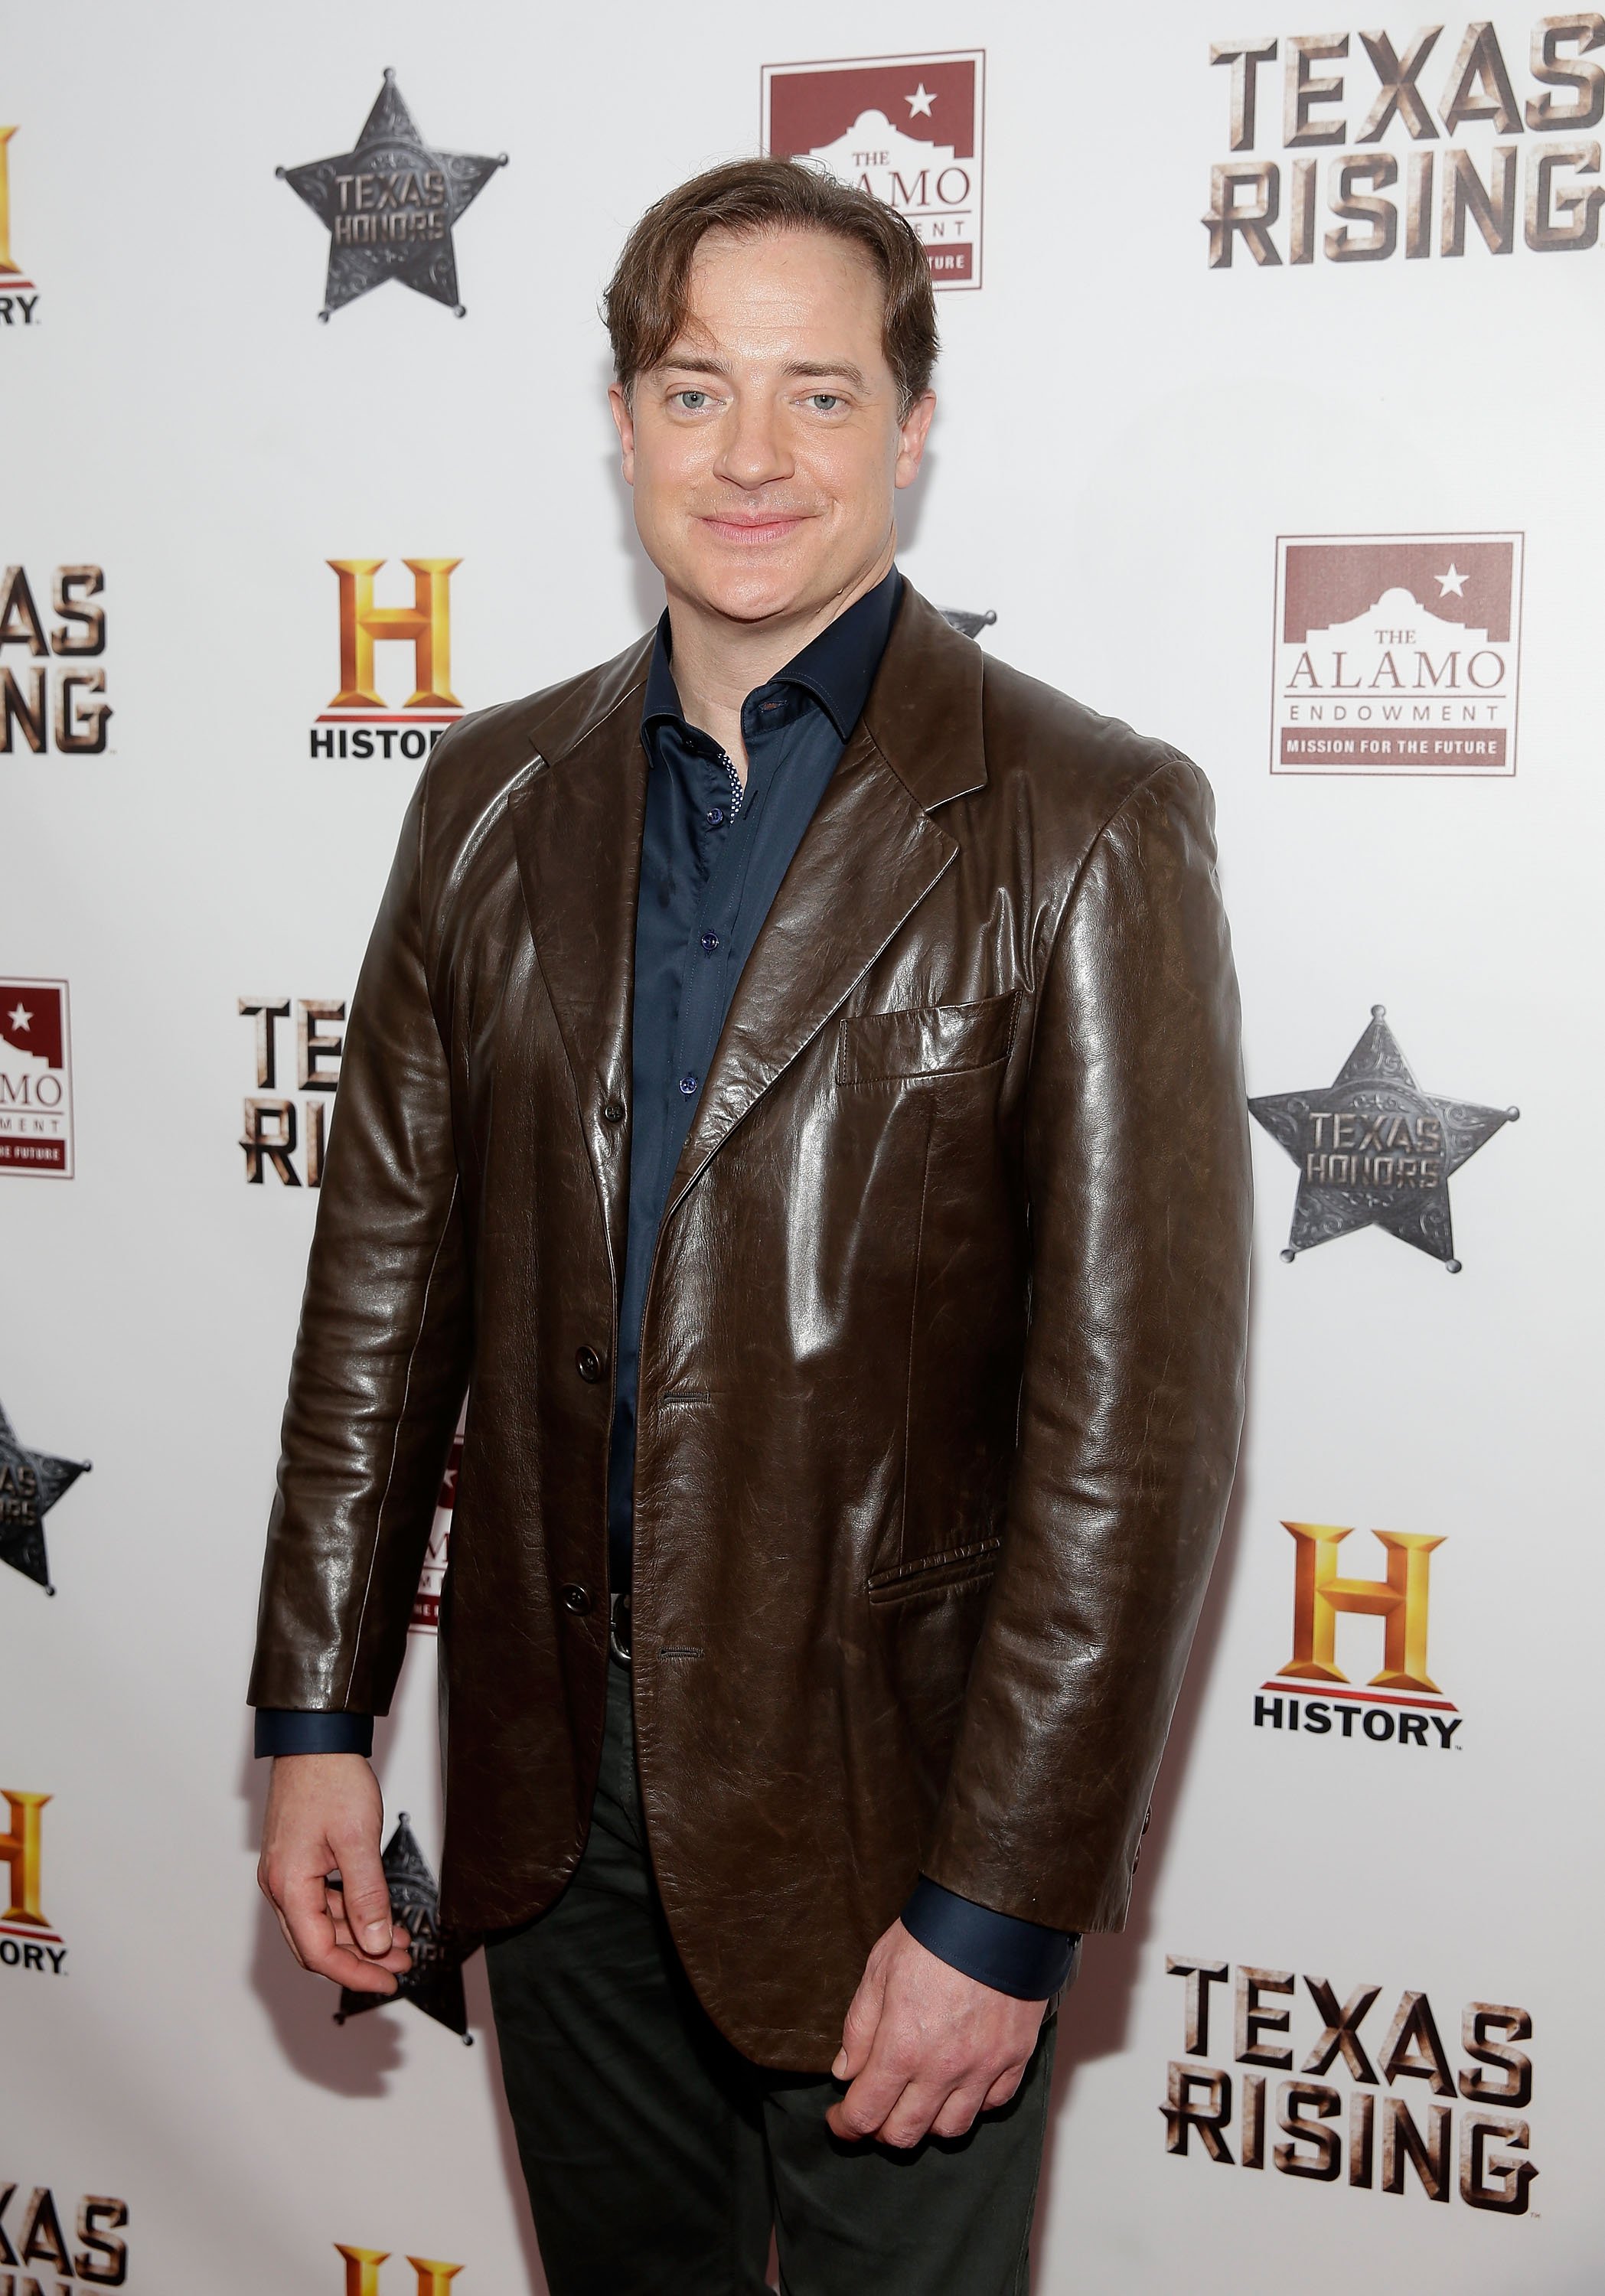 Brendan Fraser arrives at the "Texas Honors" event to celebrate the epic new HISTORY miniseries "Texas Rising" at the Alamo on May 18, 2015 | Photo: Getty Images